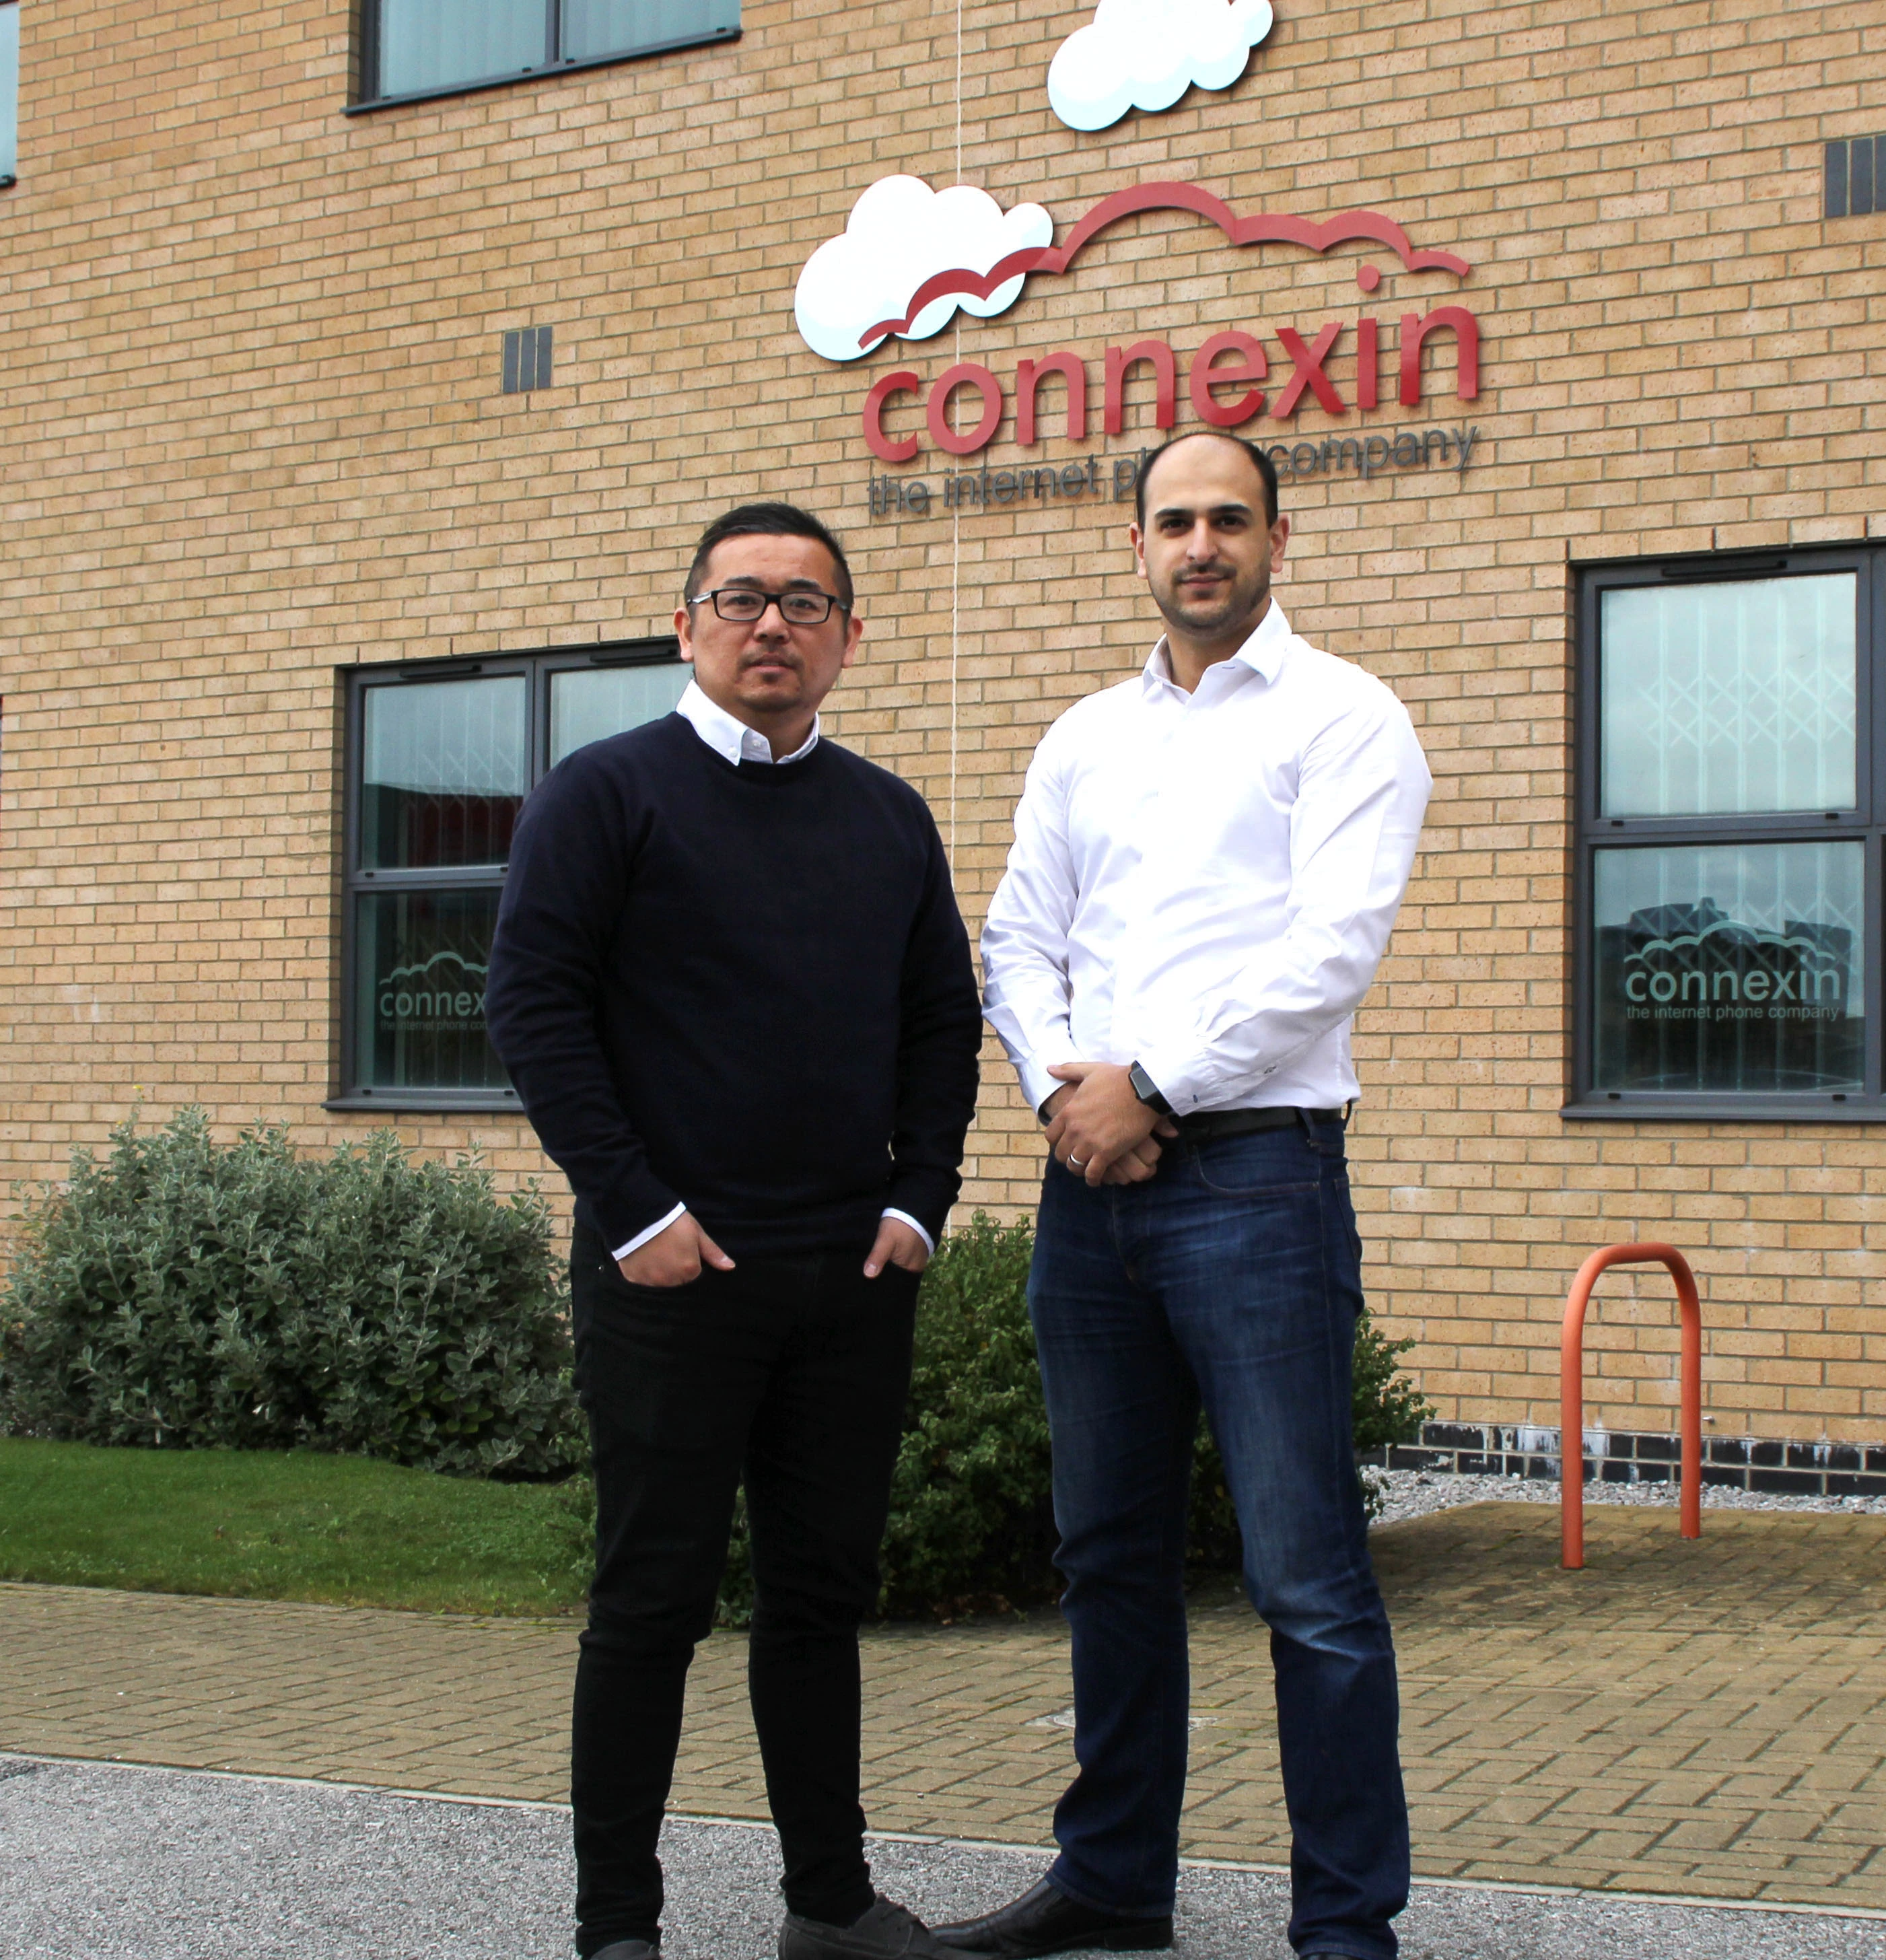 Connexin has become an official partner of the Northern Powerhouse Partnership Programme